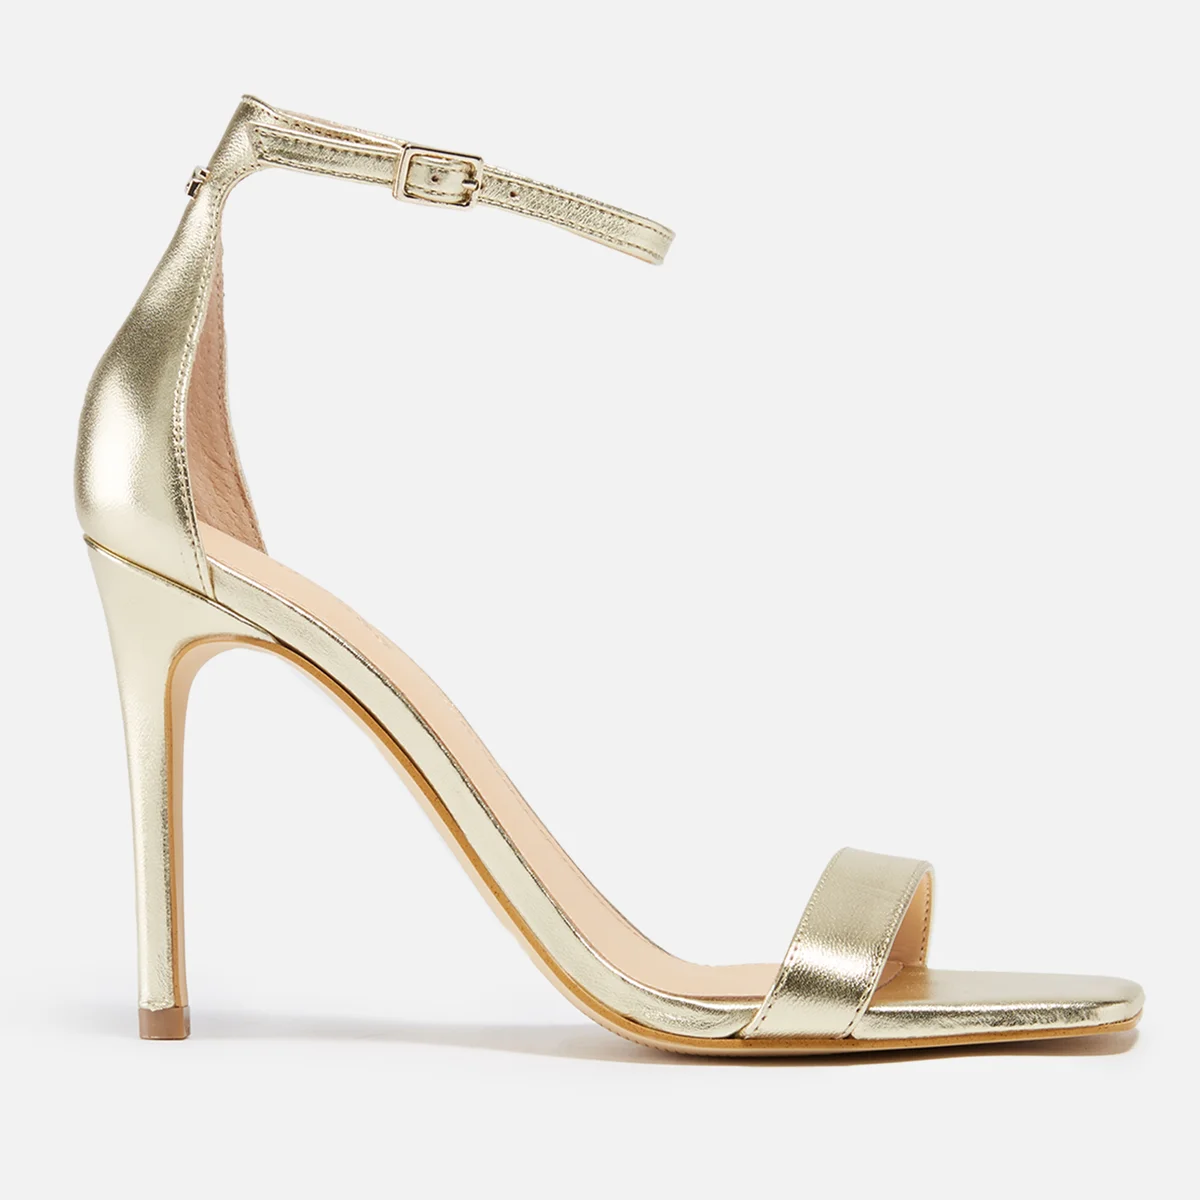 Guess Devon Leather Heeled Sandals Image 1